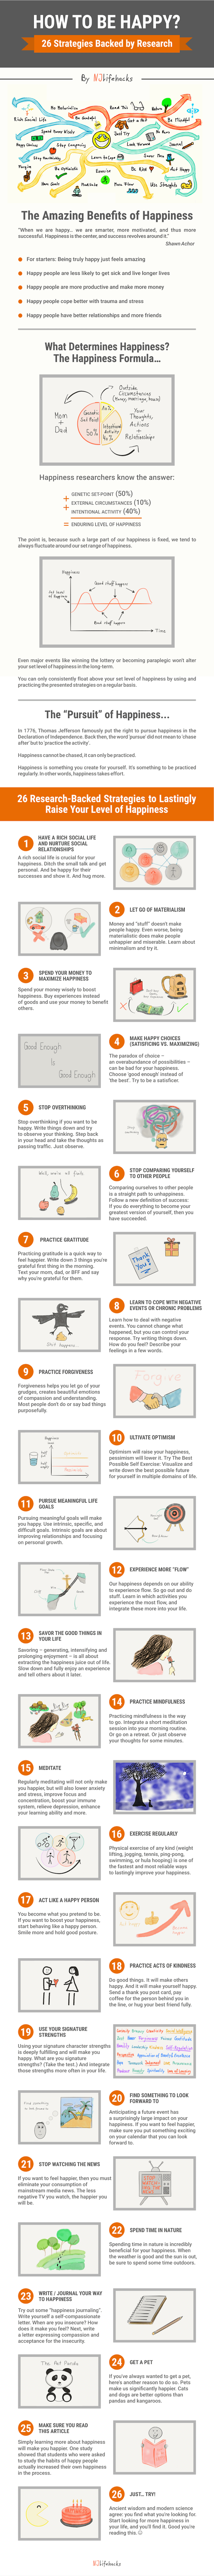 How-to-be-happy-infographic